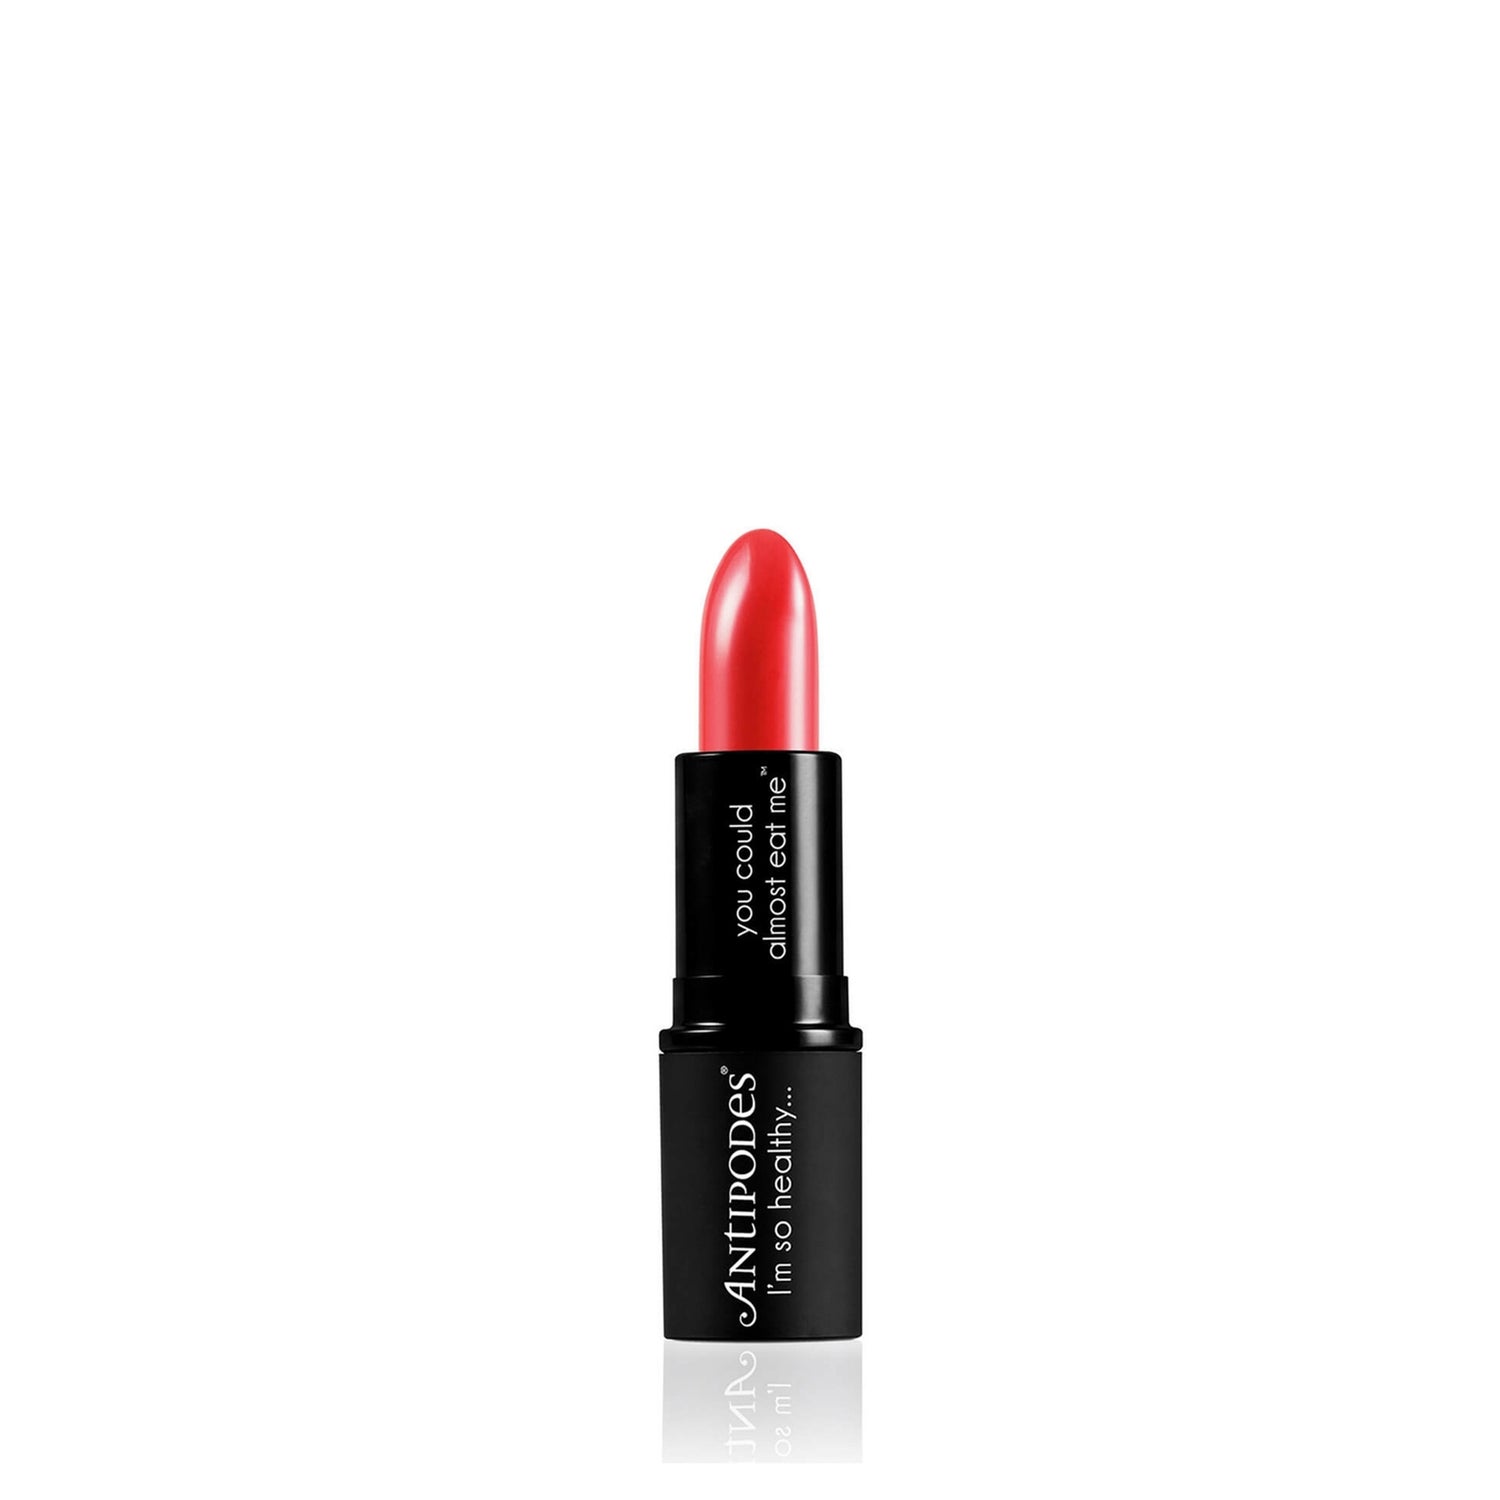 Antipodes Lipstick 4 g - South Pacific Coral